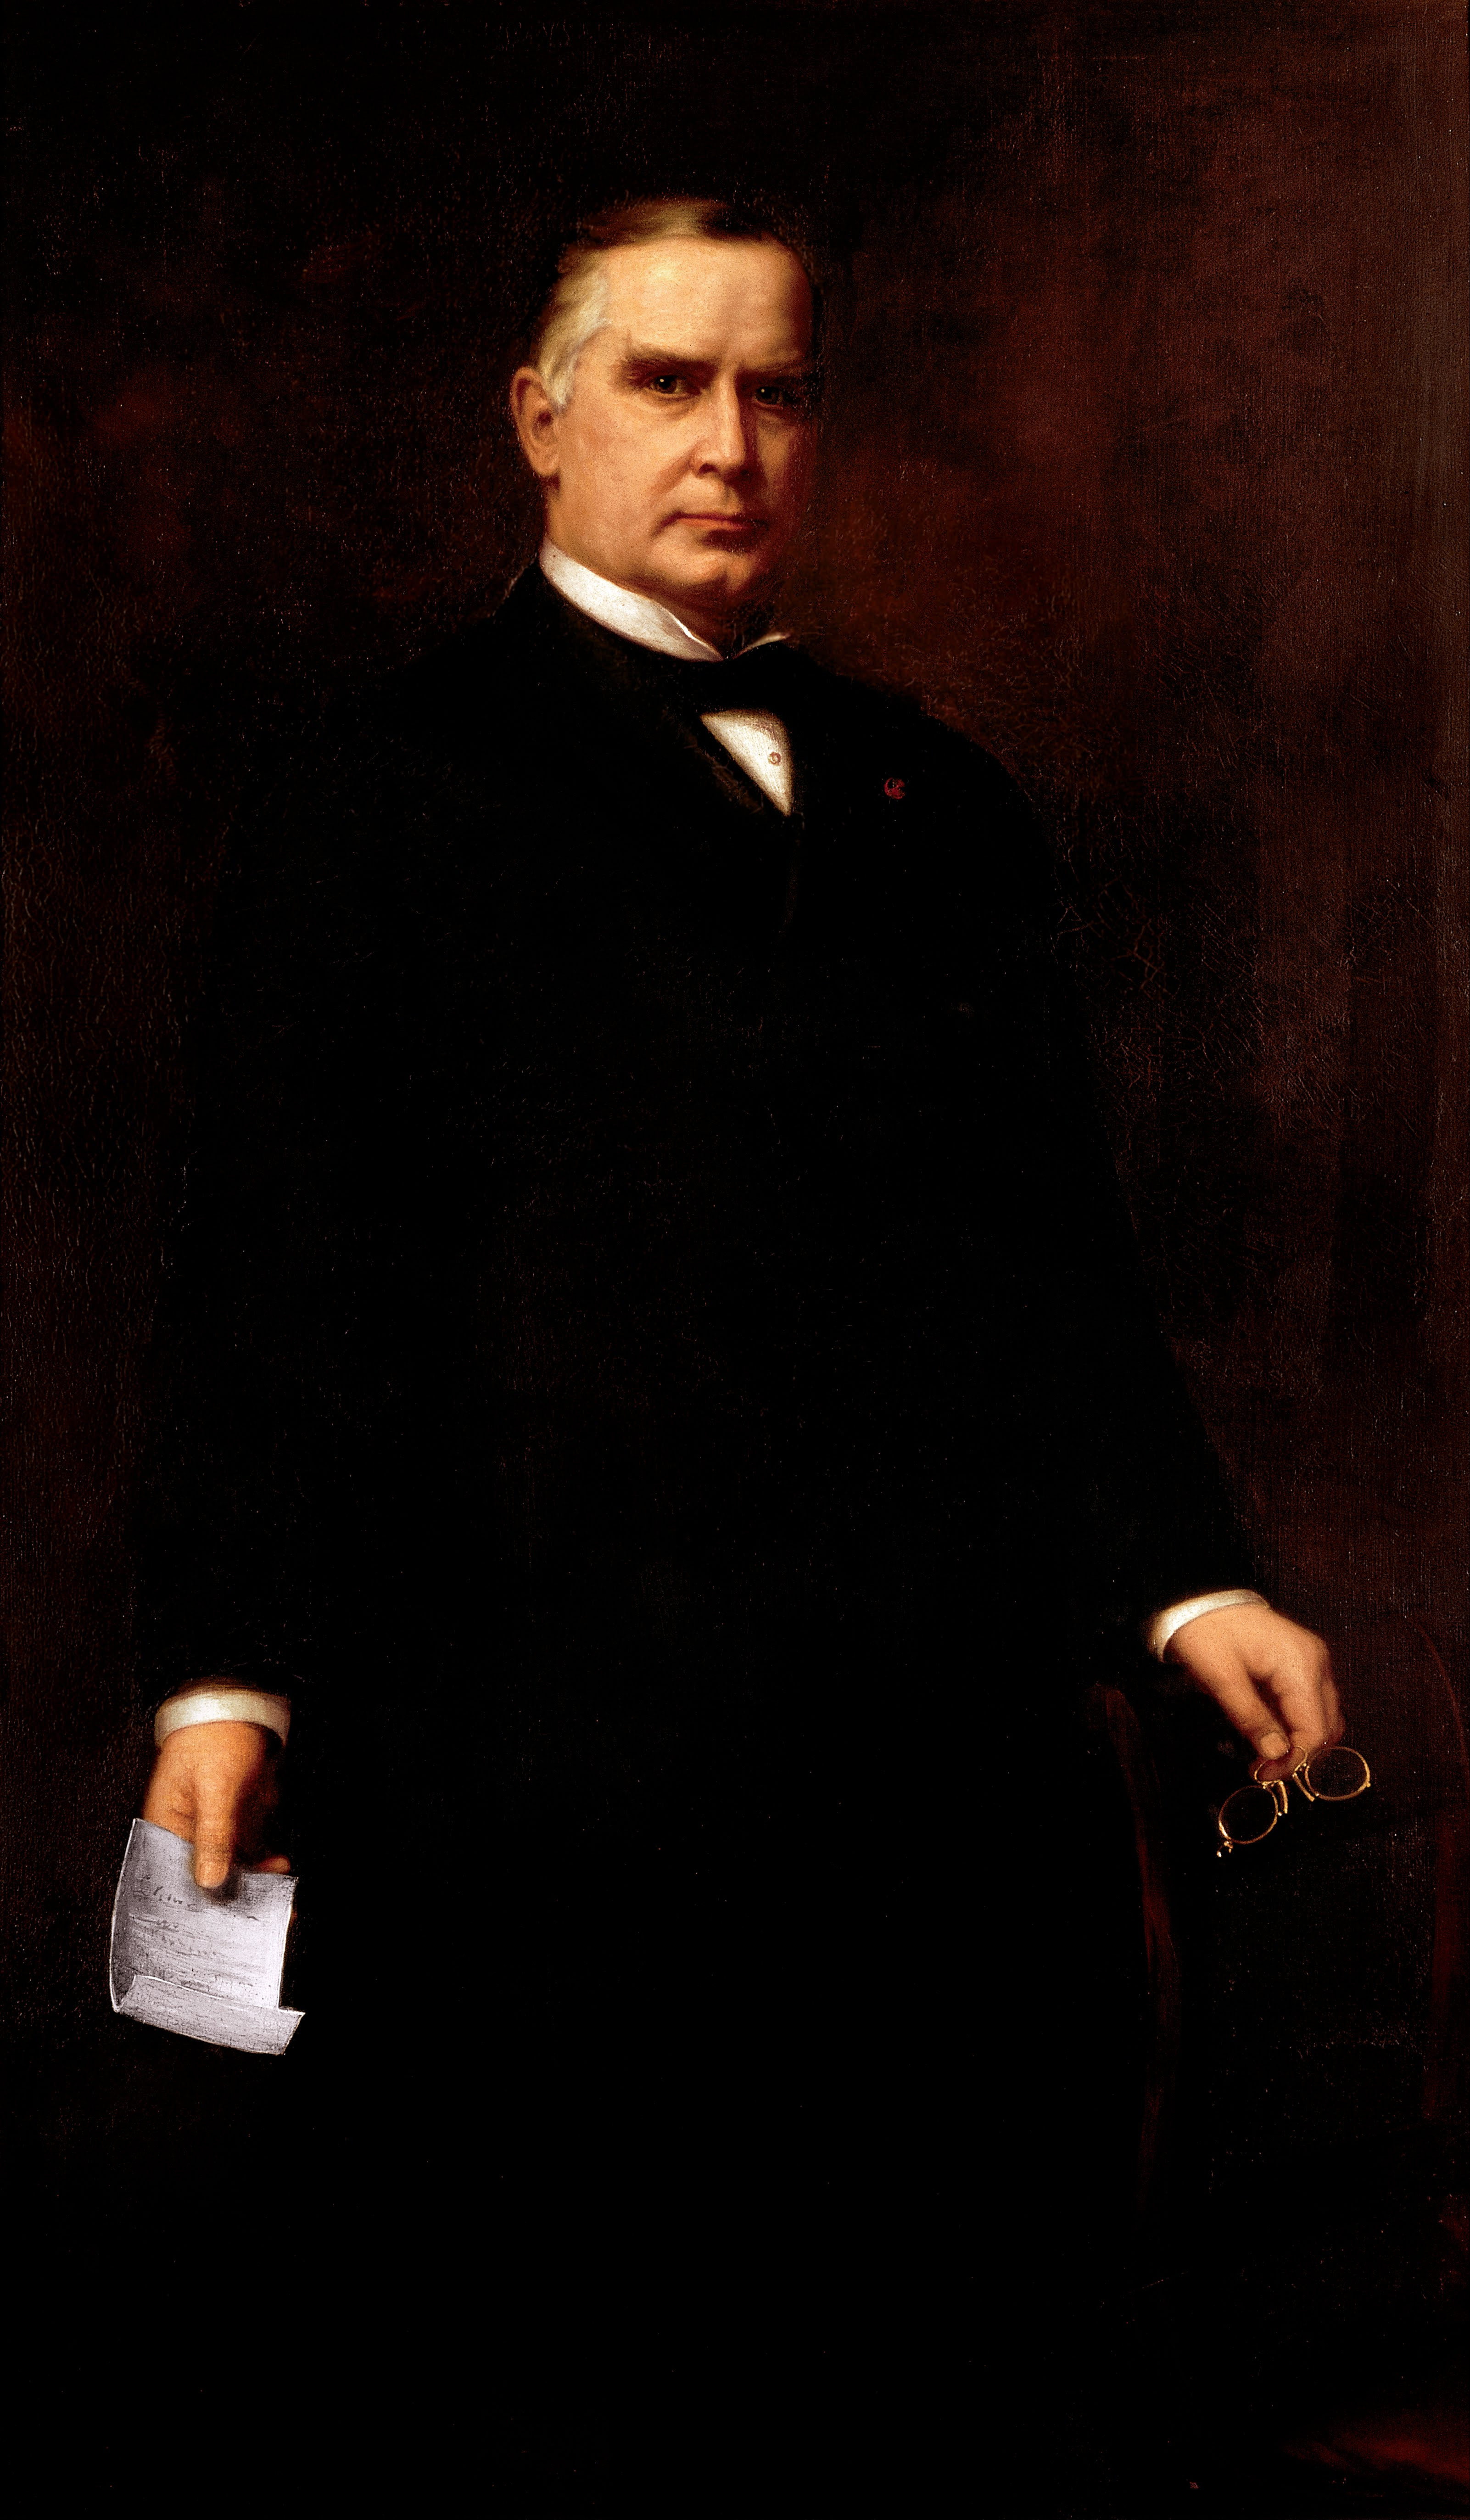 The official Presidential portrait of William McKinley, painted by Harriet Anderson Stubbs Murphy.